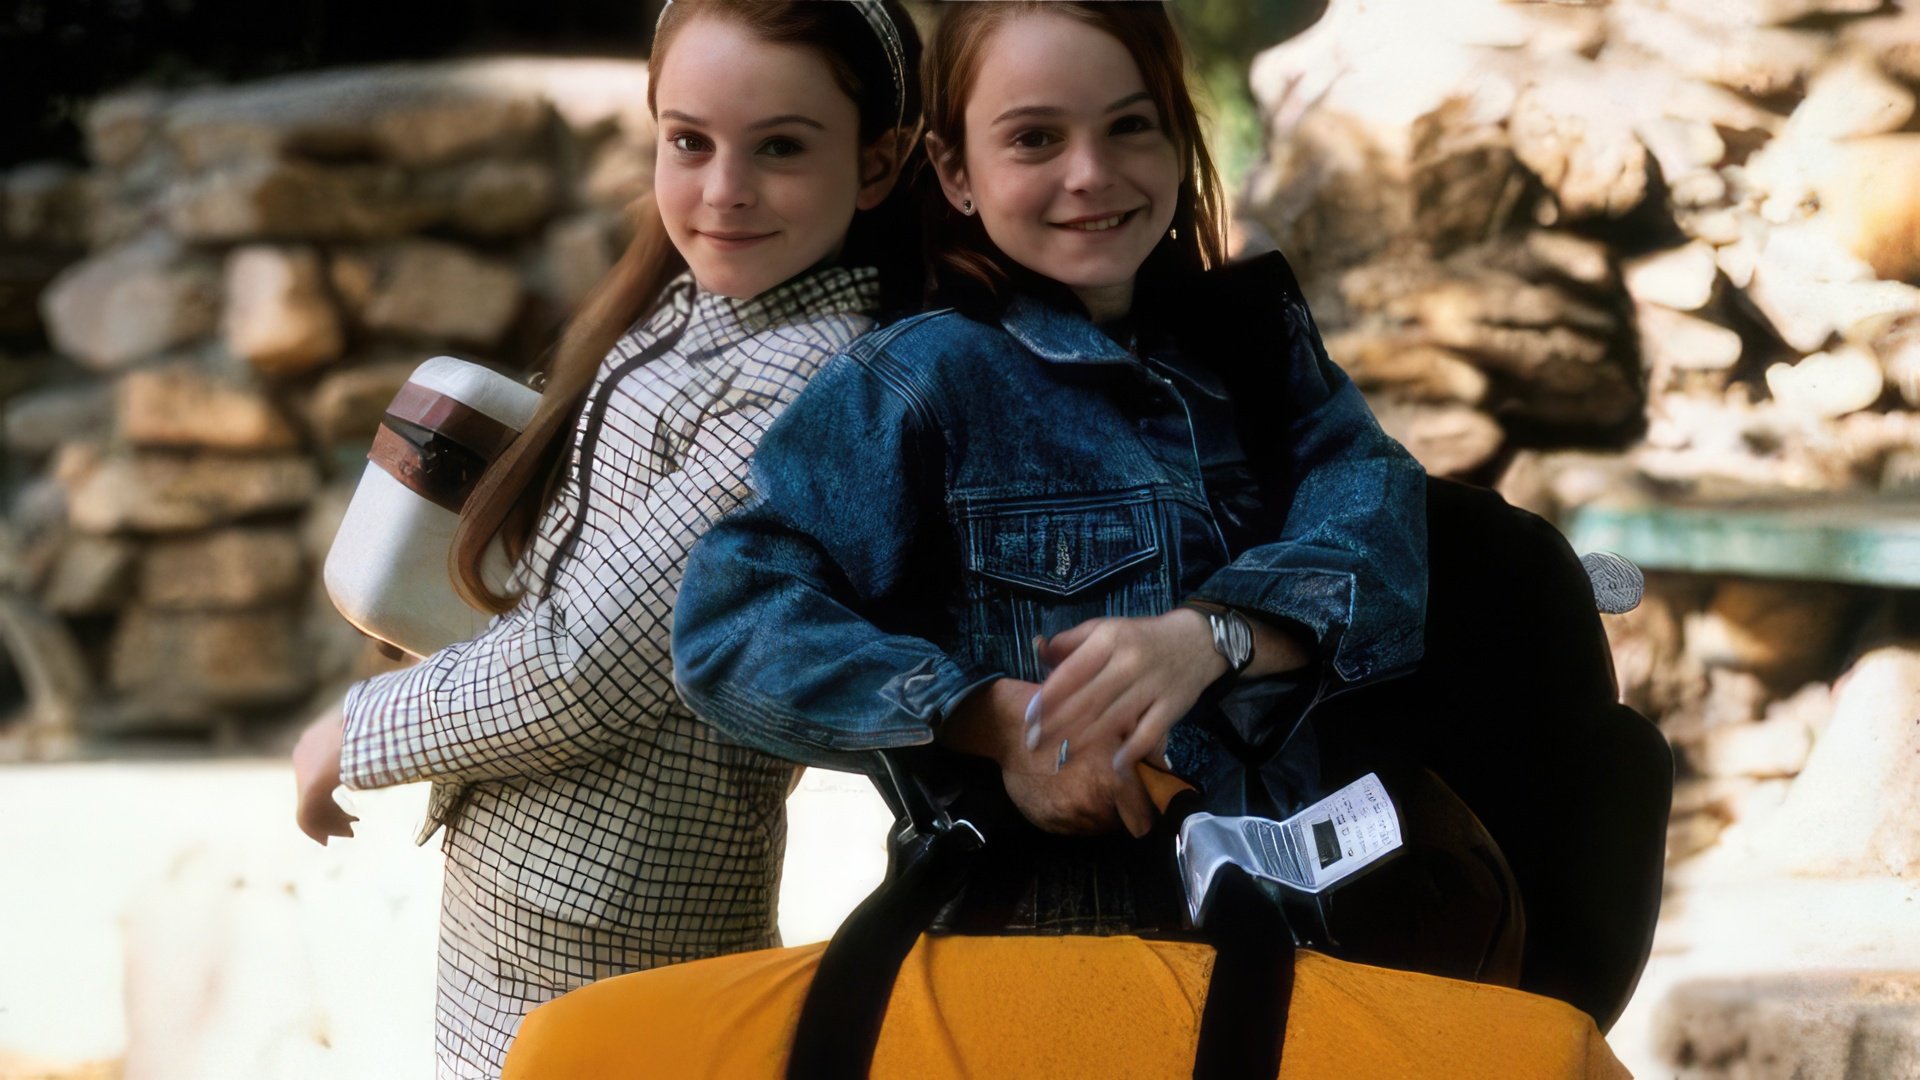 In The Parent Trap Lindsay Lohan played two roles at once